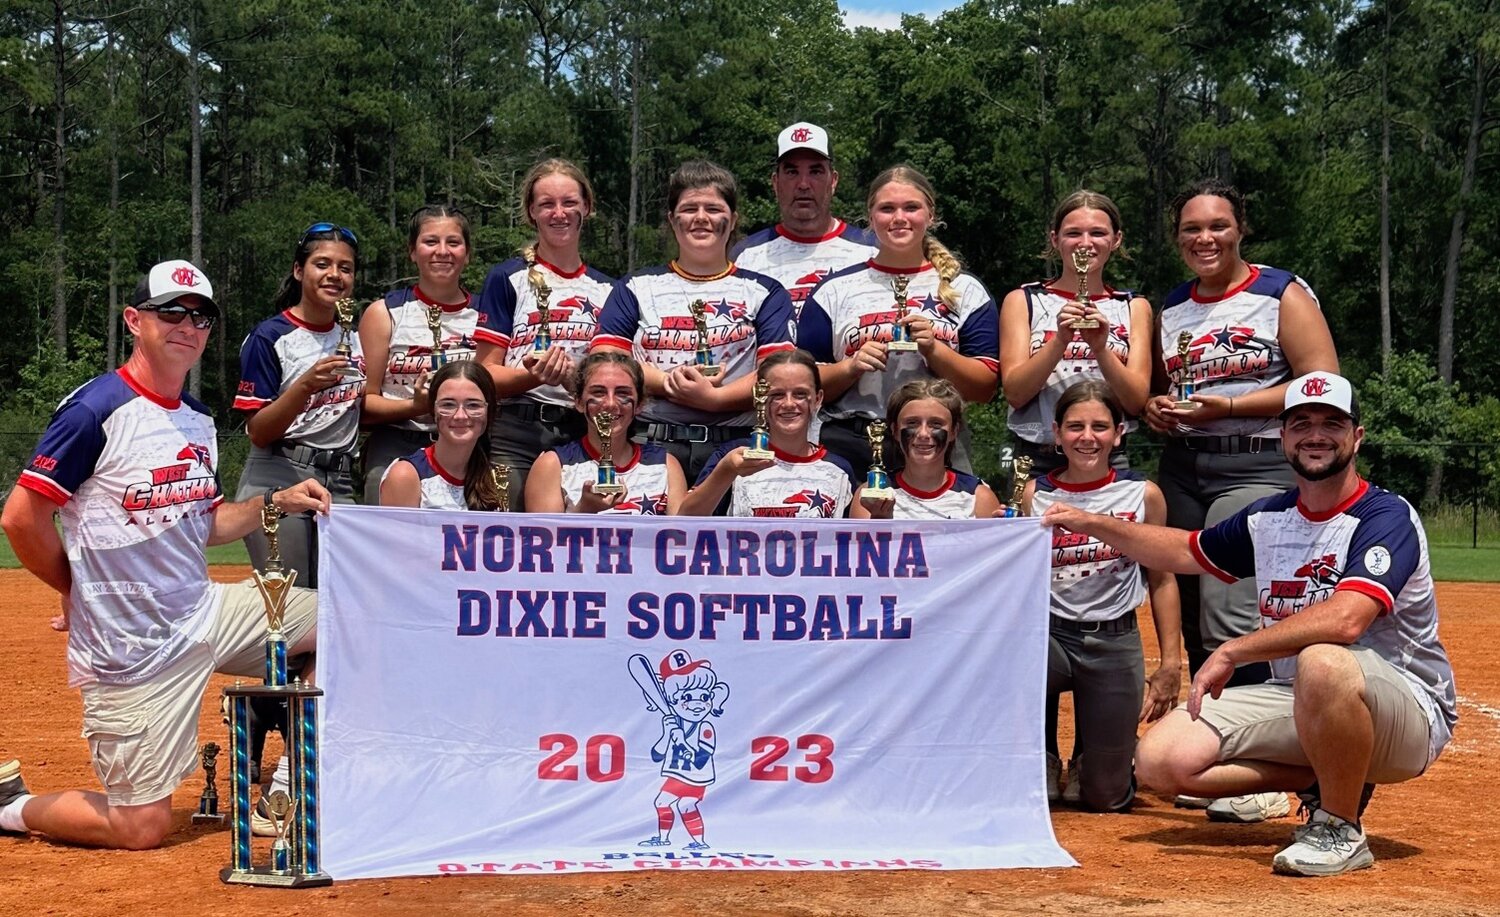 The West Chatham 15U All-Star softball team will compete in the 2023 Dixie Youth Softball Belles (15U) World Series in Alexandria, La. The team recently won the N.C. state championship in their division.